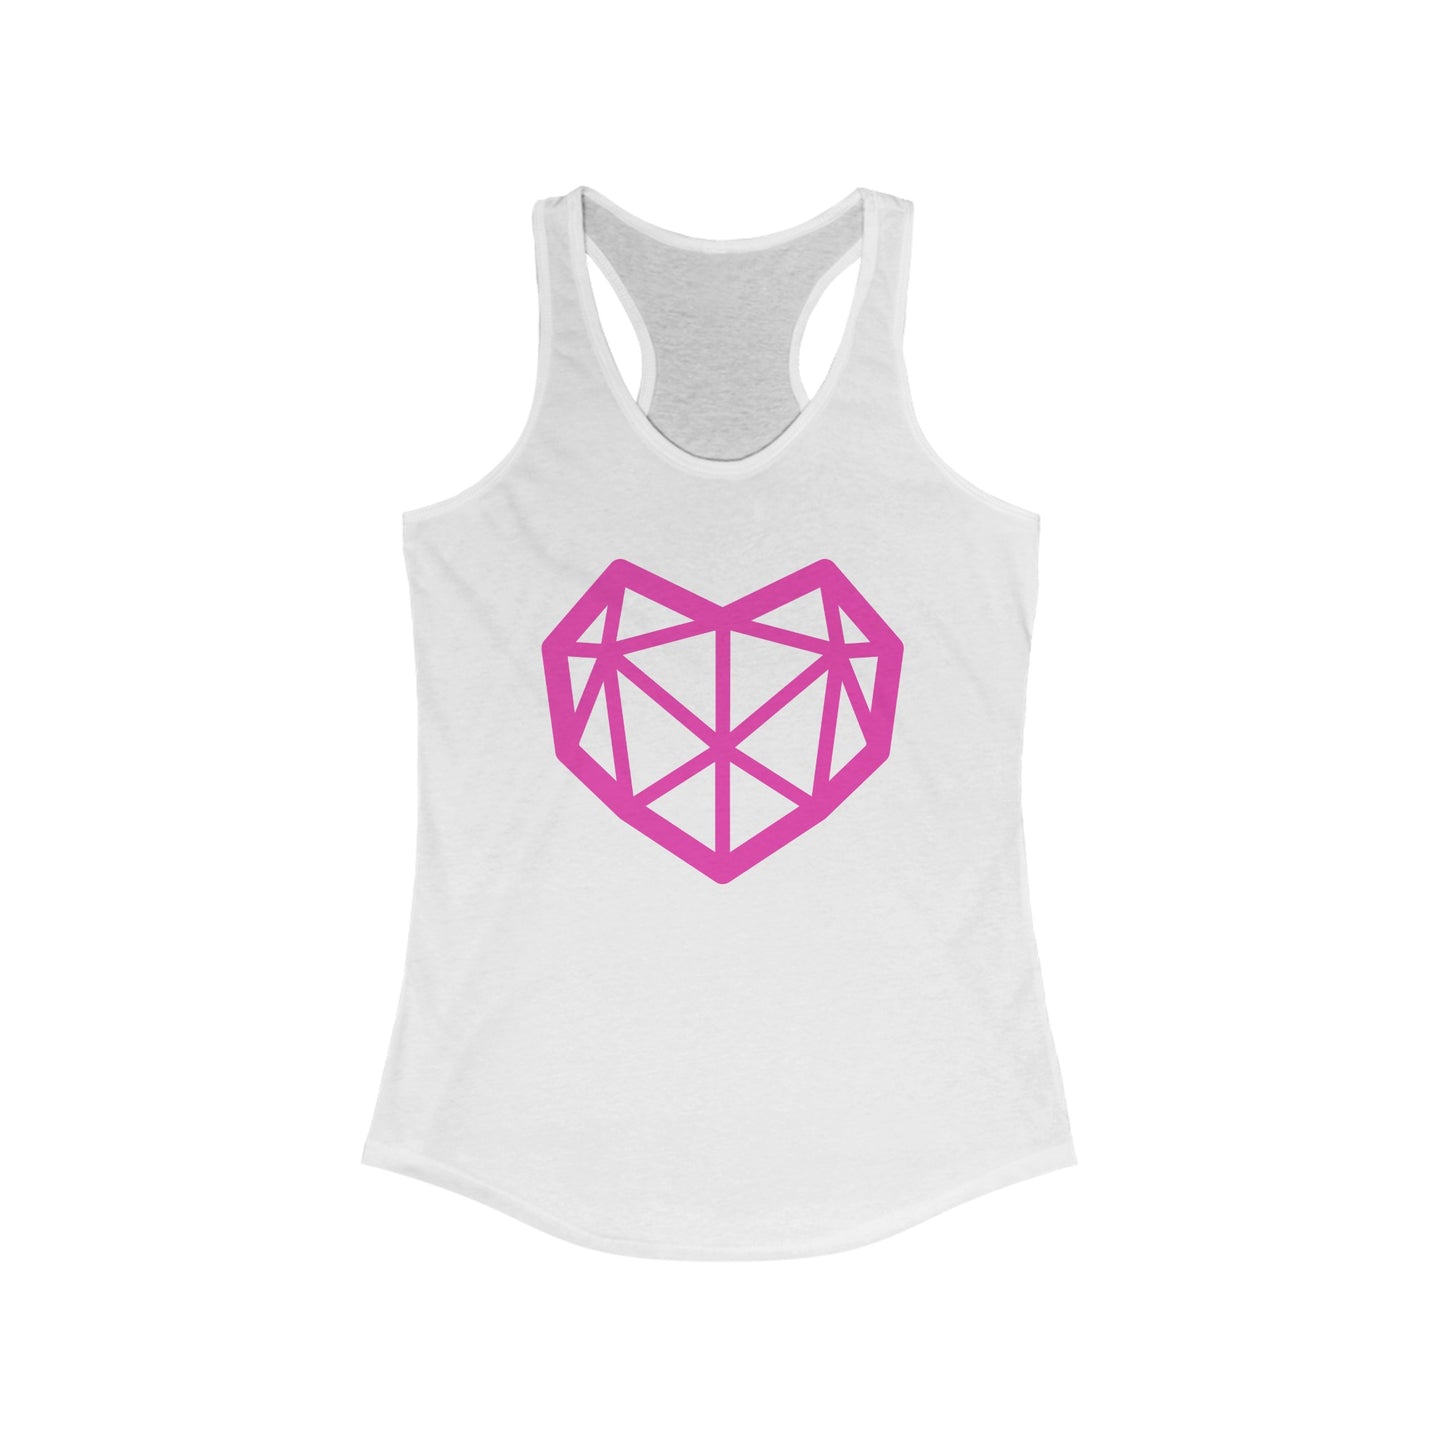 I Love You the Most in My Heart - Women's Ideal Racerback Tank